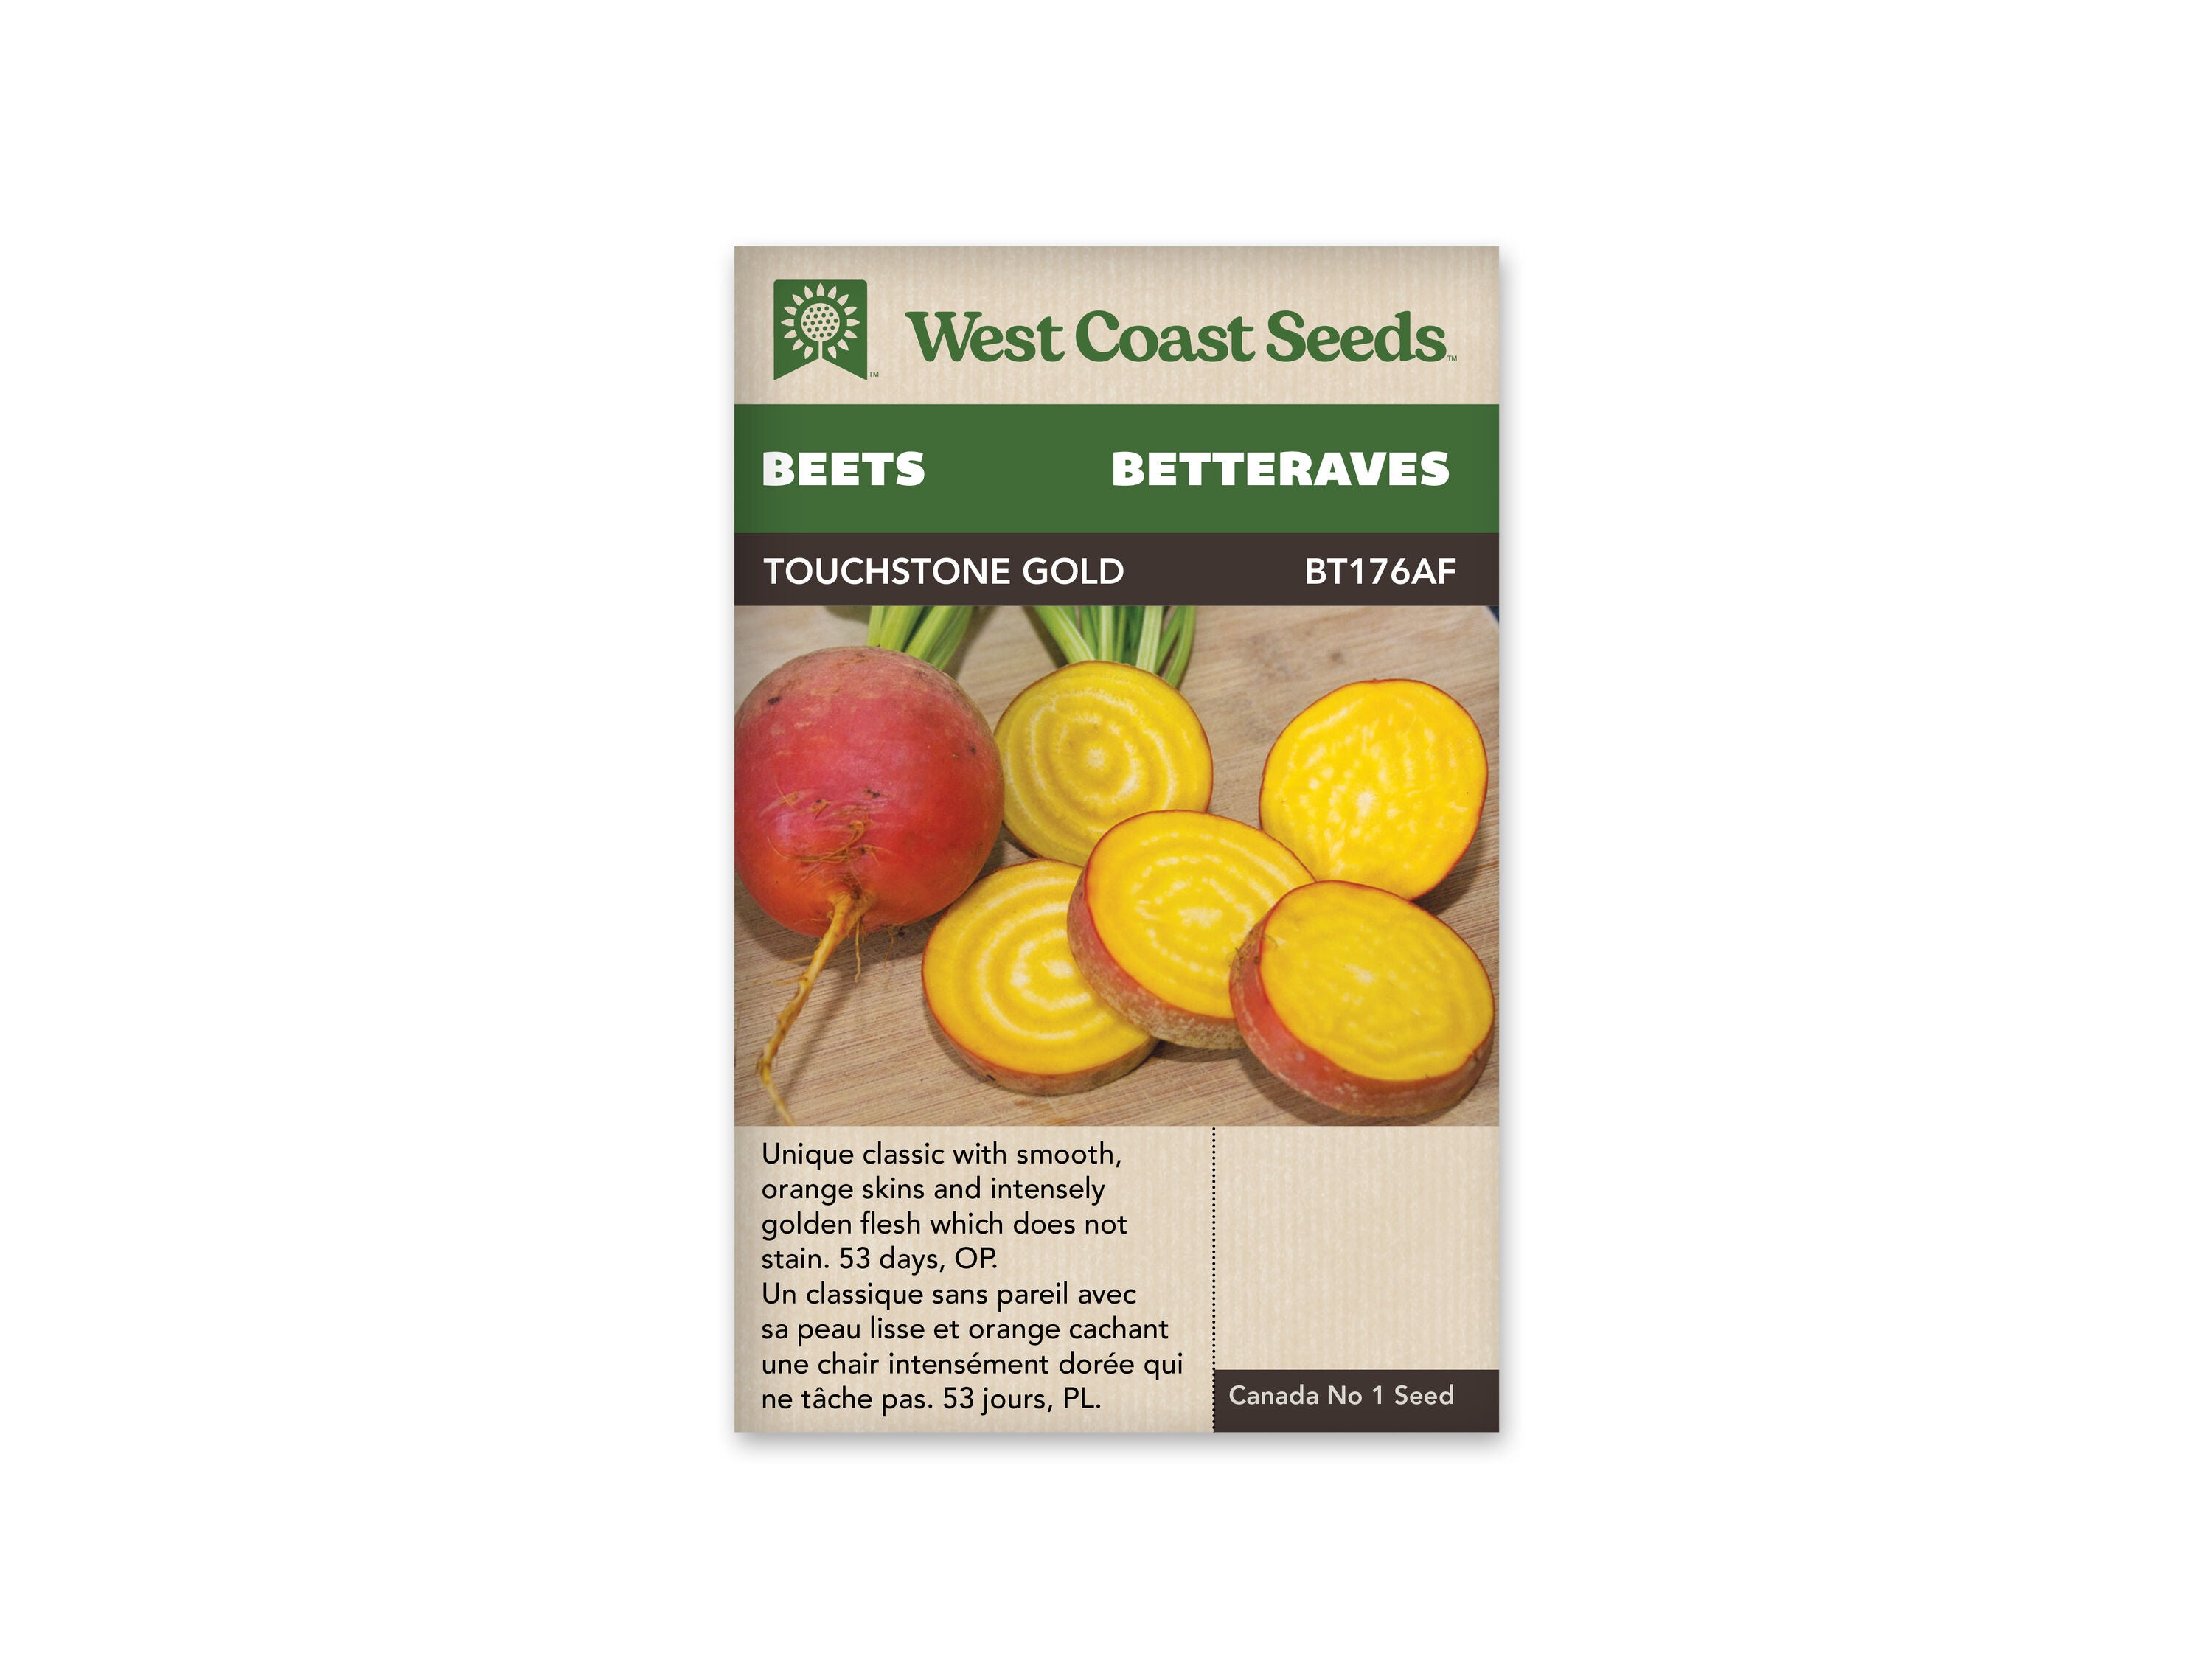 Touchstone Gold Beets Seeds